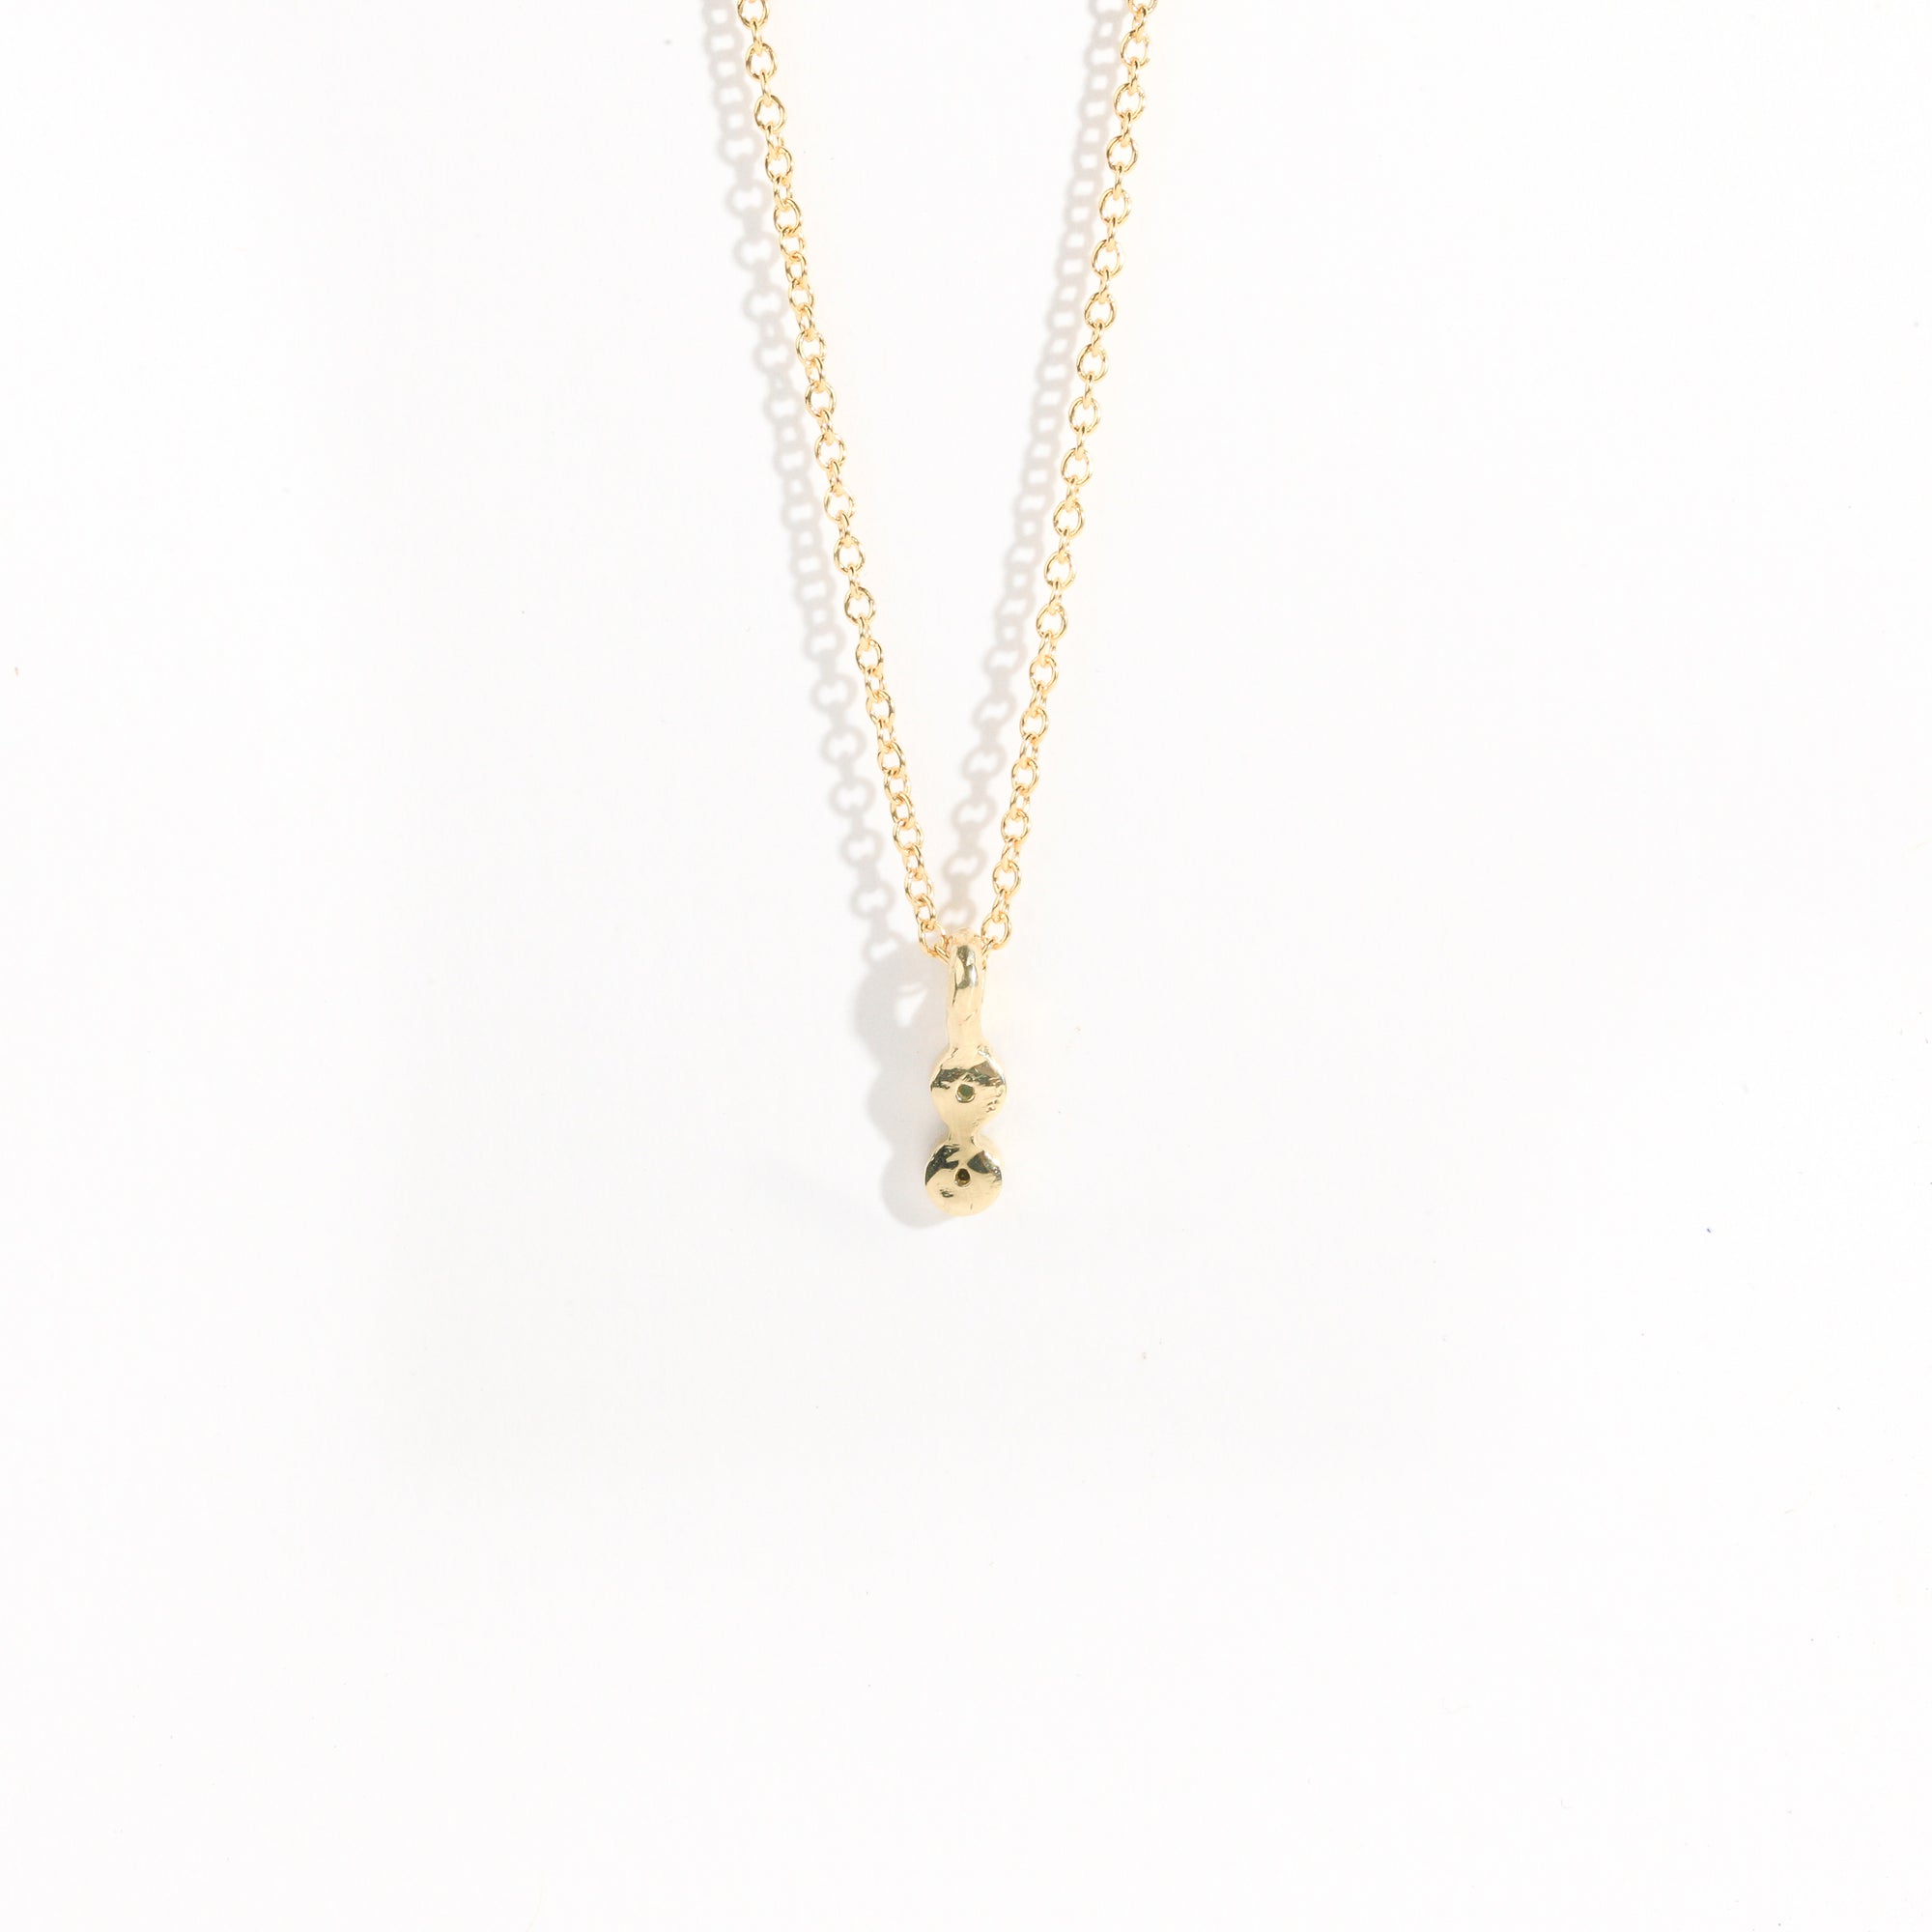 Petite two stone pendant with ethically sourced Australian sapphires crafted in yellow gold by Black Finch